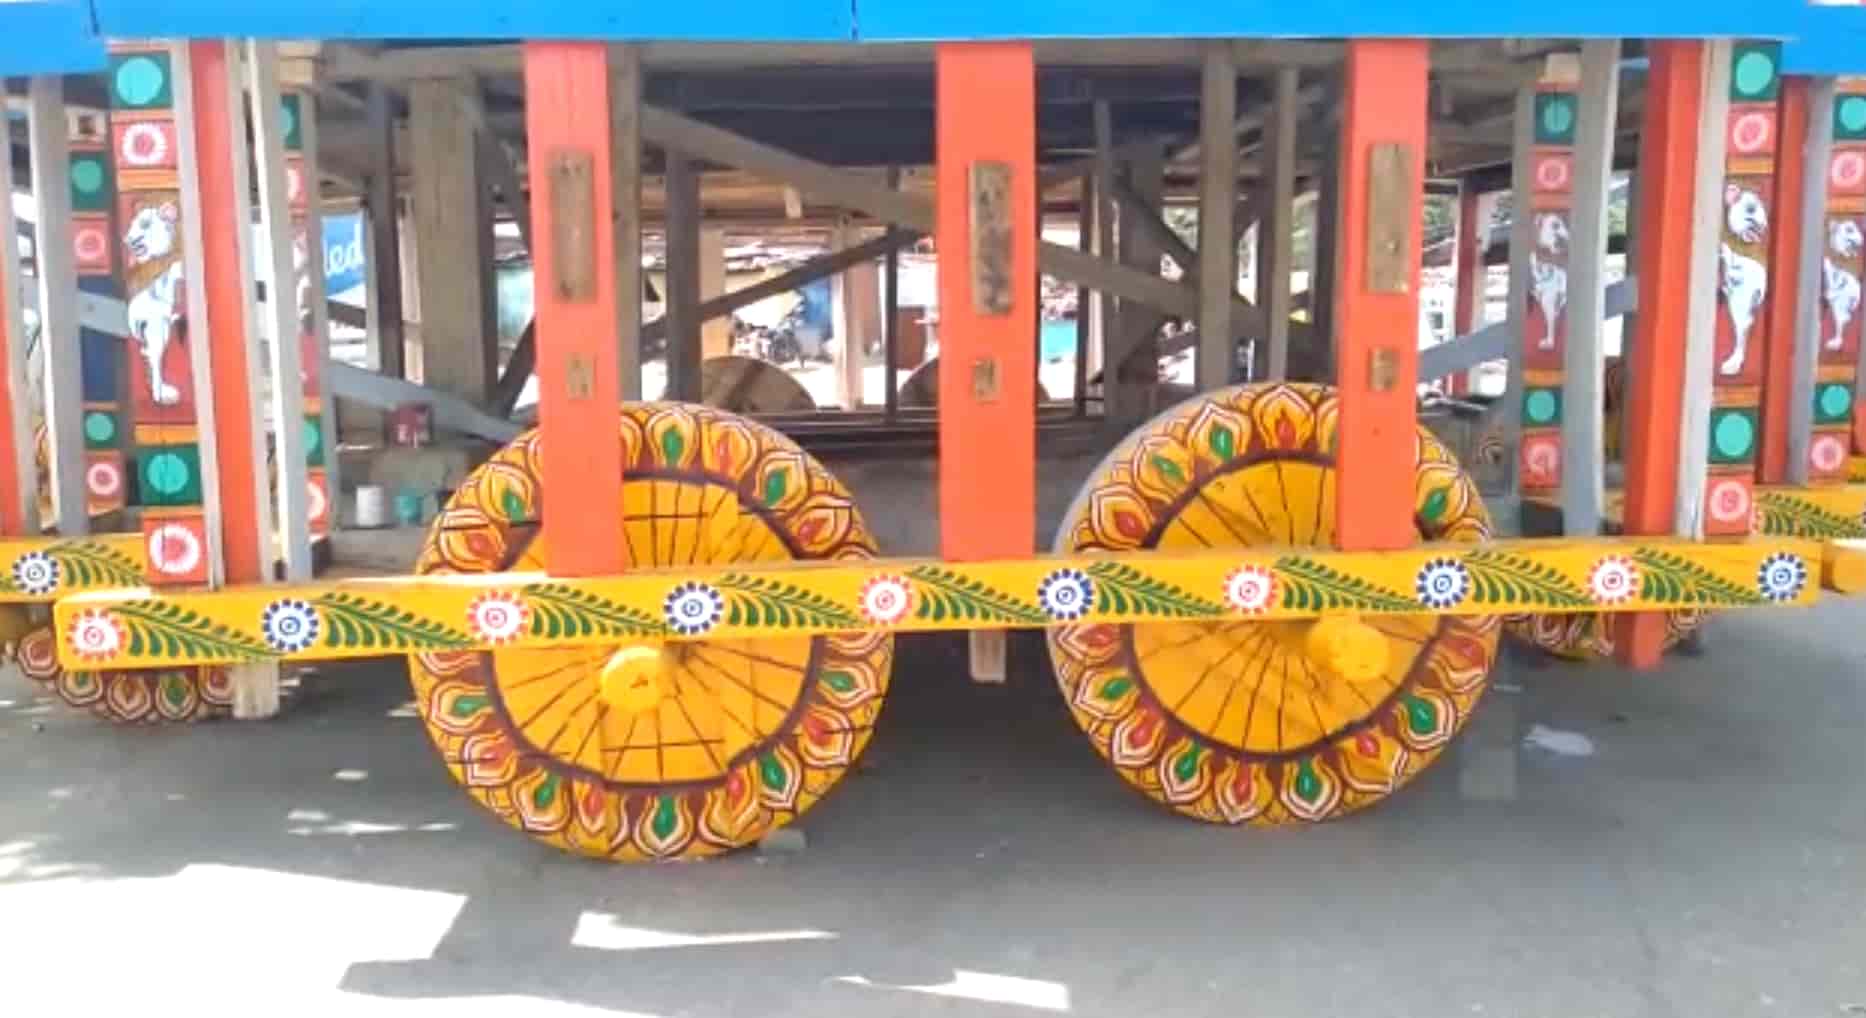 Ranchi prepares for Jagannath Rath Yatra, a cherished religious event and fair, starting June 20th. The celebration attracts attendees from across Jharkhand and neighboring states.
